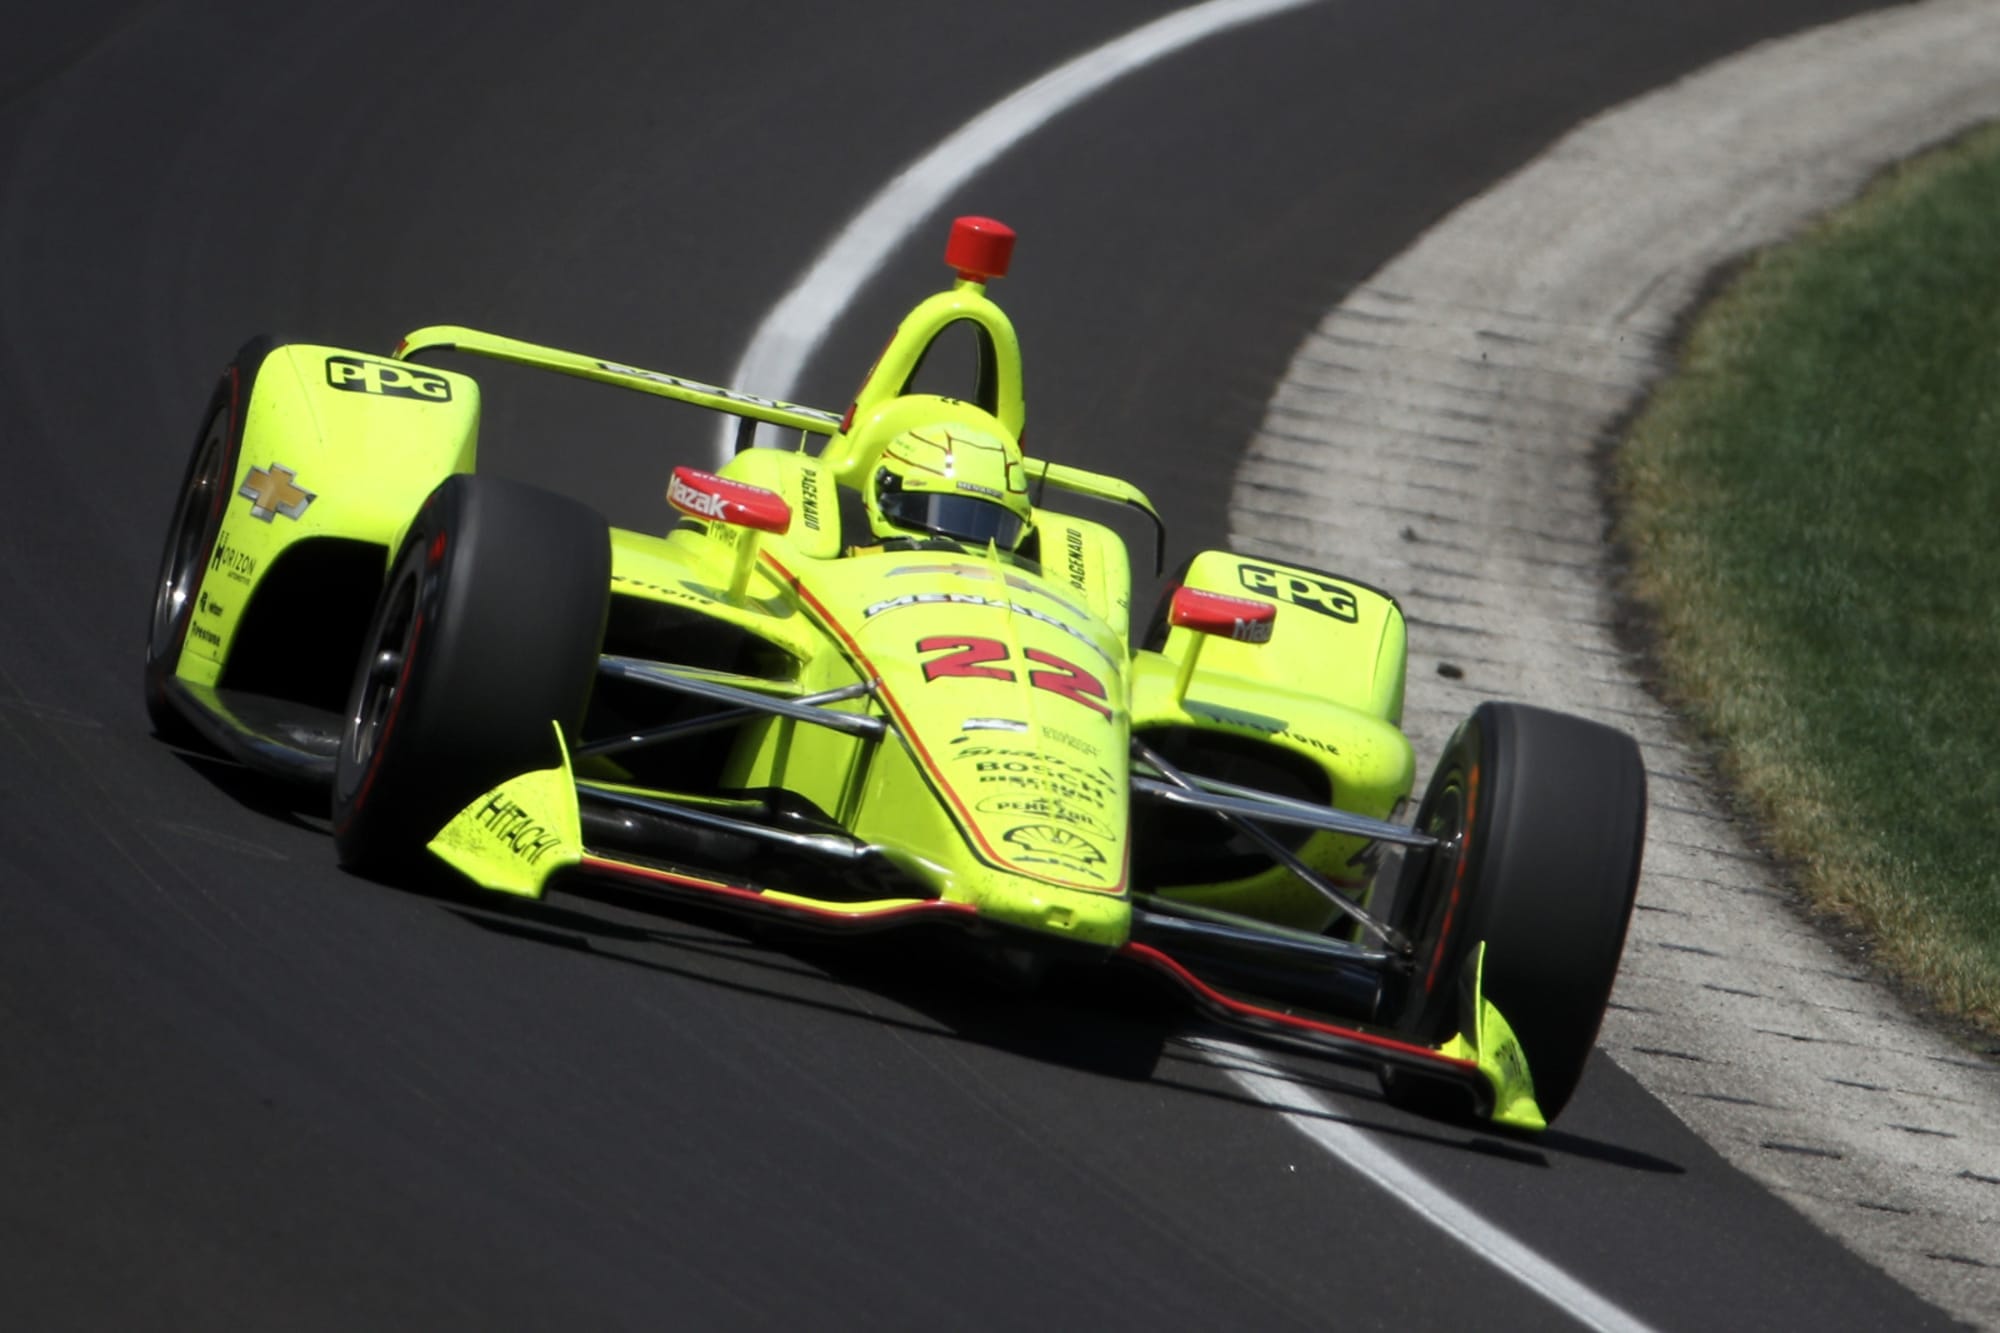 2019 Indy 500 Simon Pagenaud takes the pole position for the 103rd running